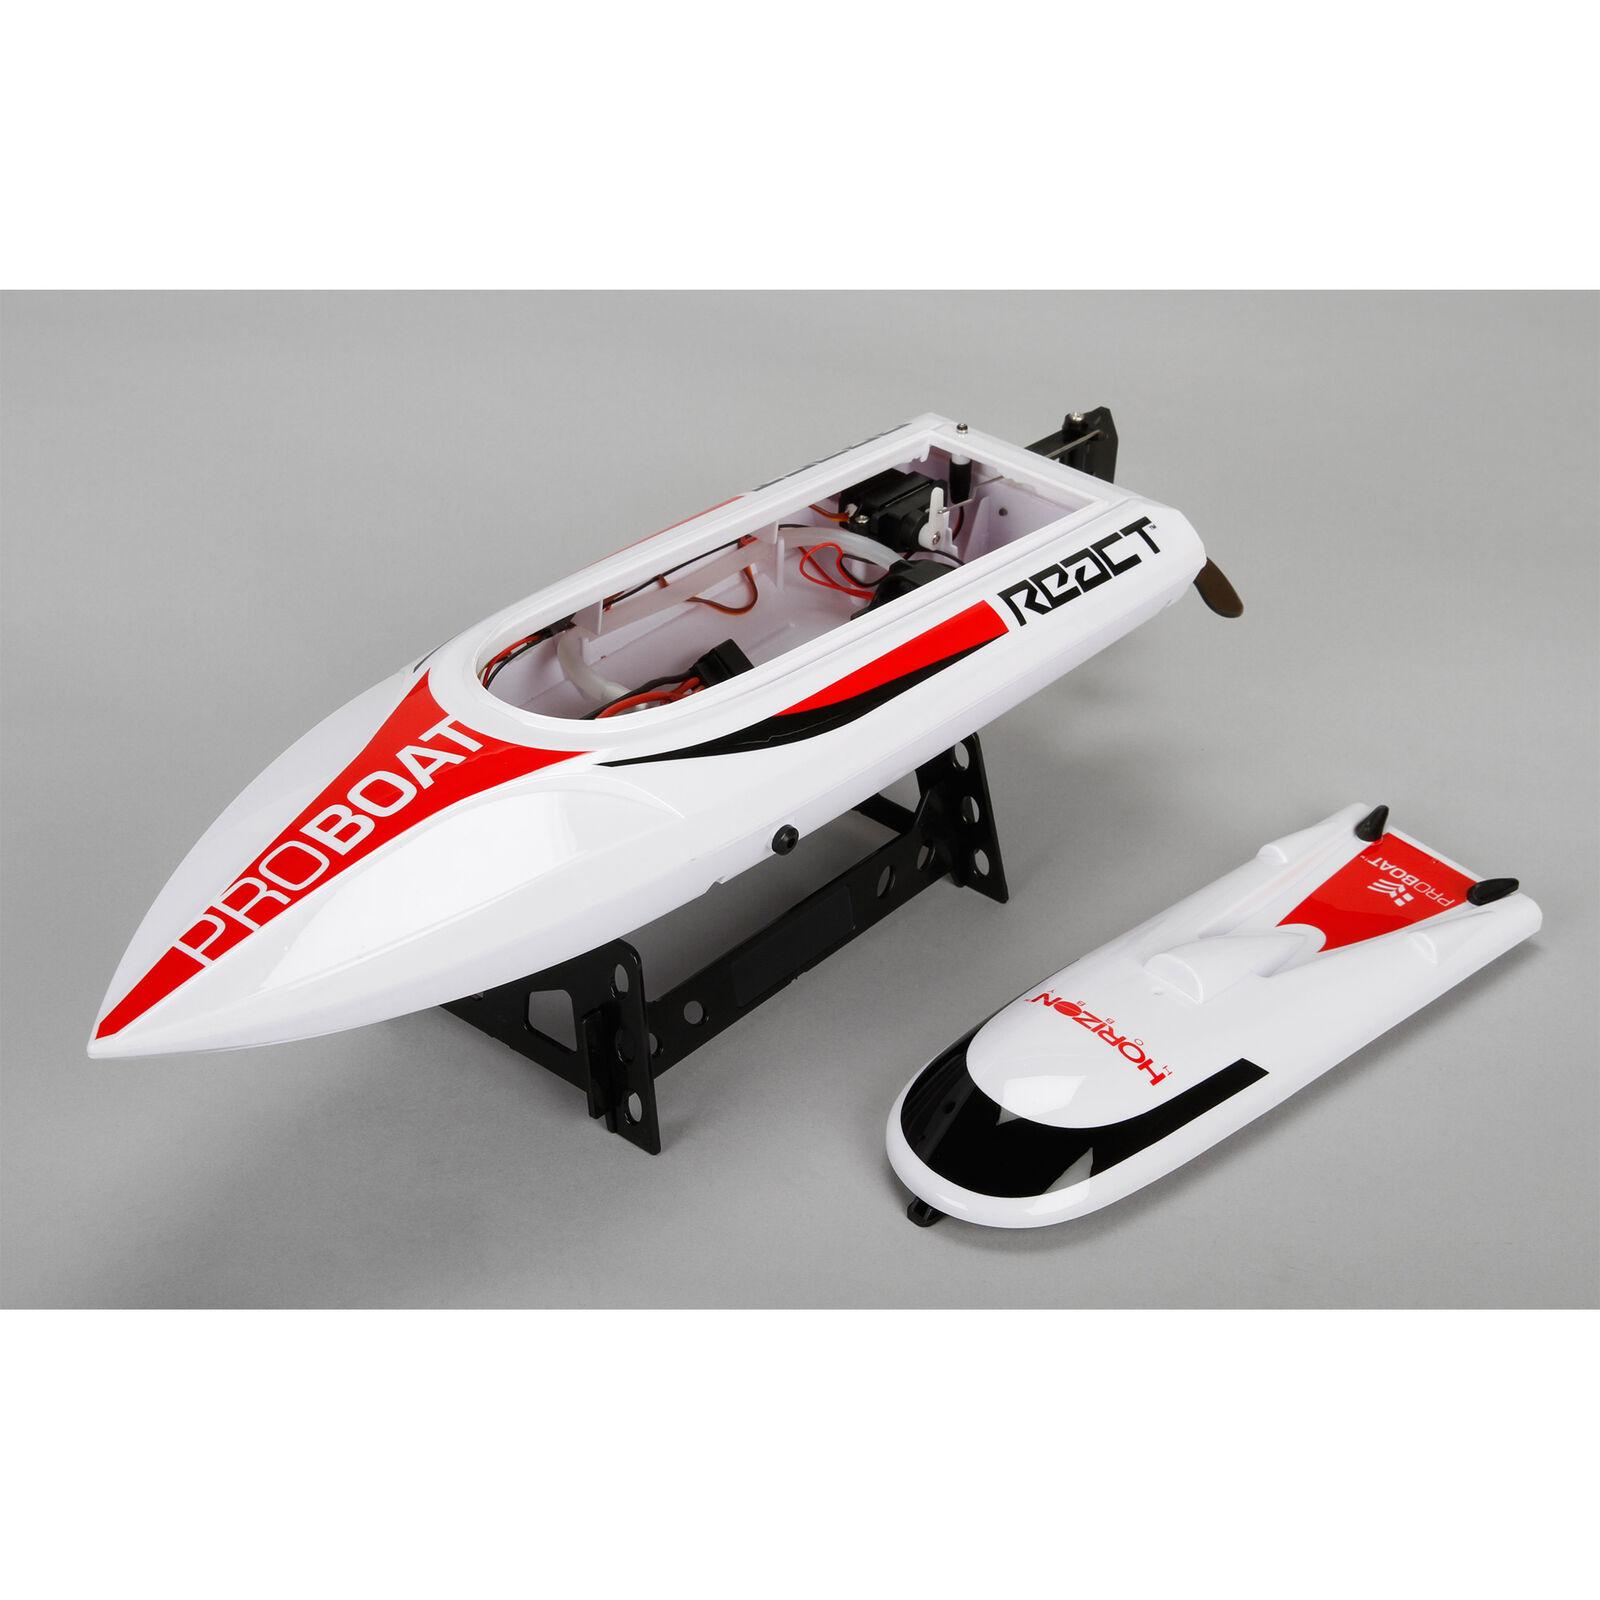 React 17 Self Righting Brushed Deep V Rtr: Exploring more remote control boat products and learning from fellow enthusiasts.